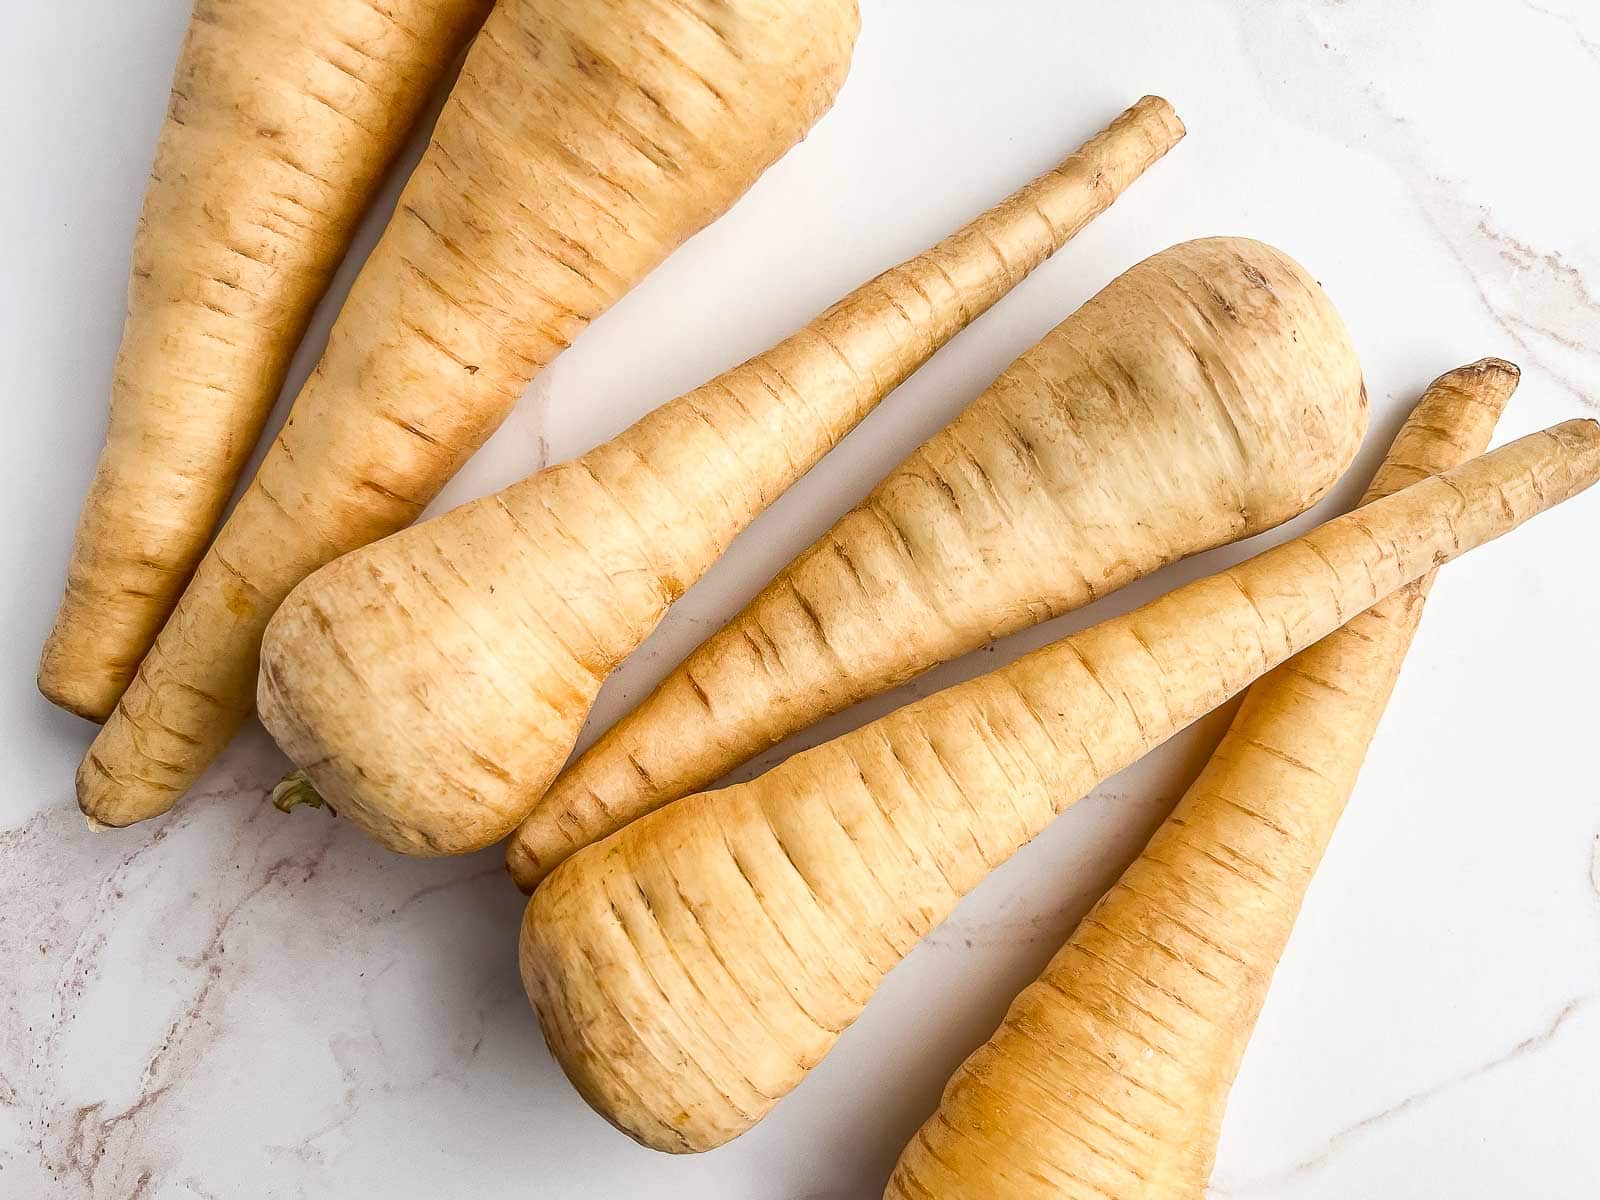 Whole parsnips laid across a marble counter.